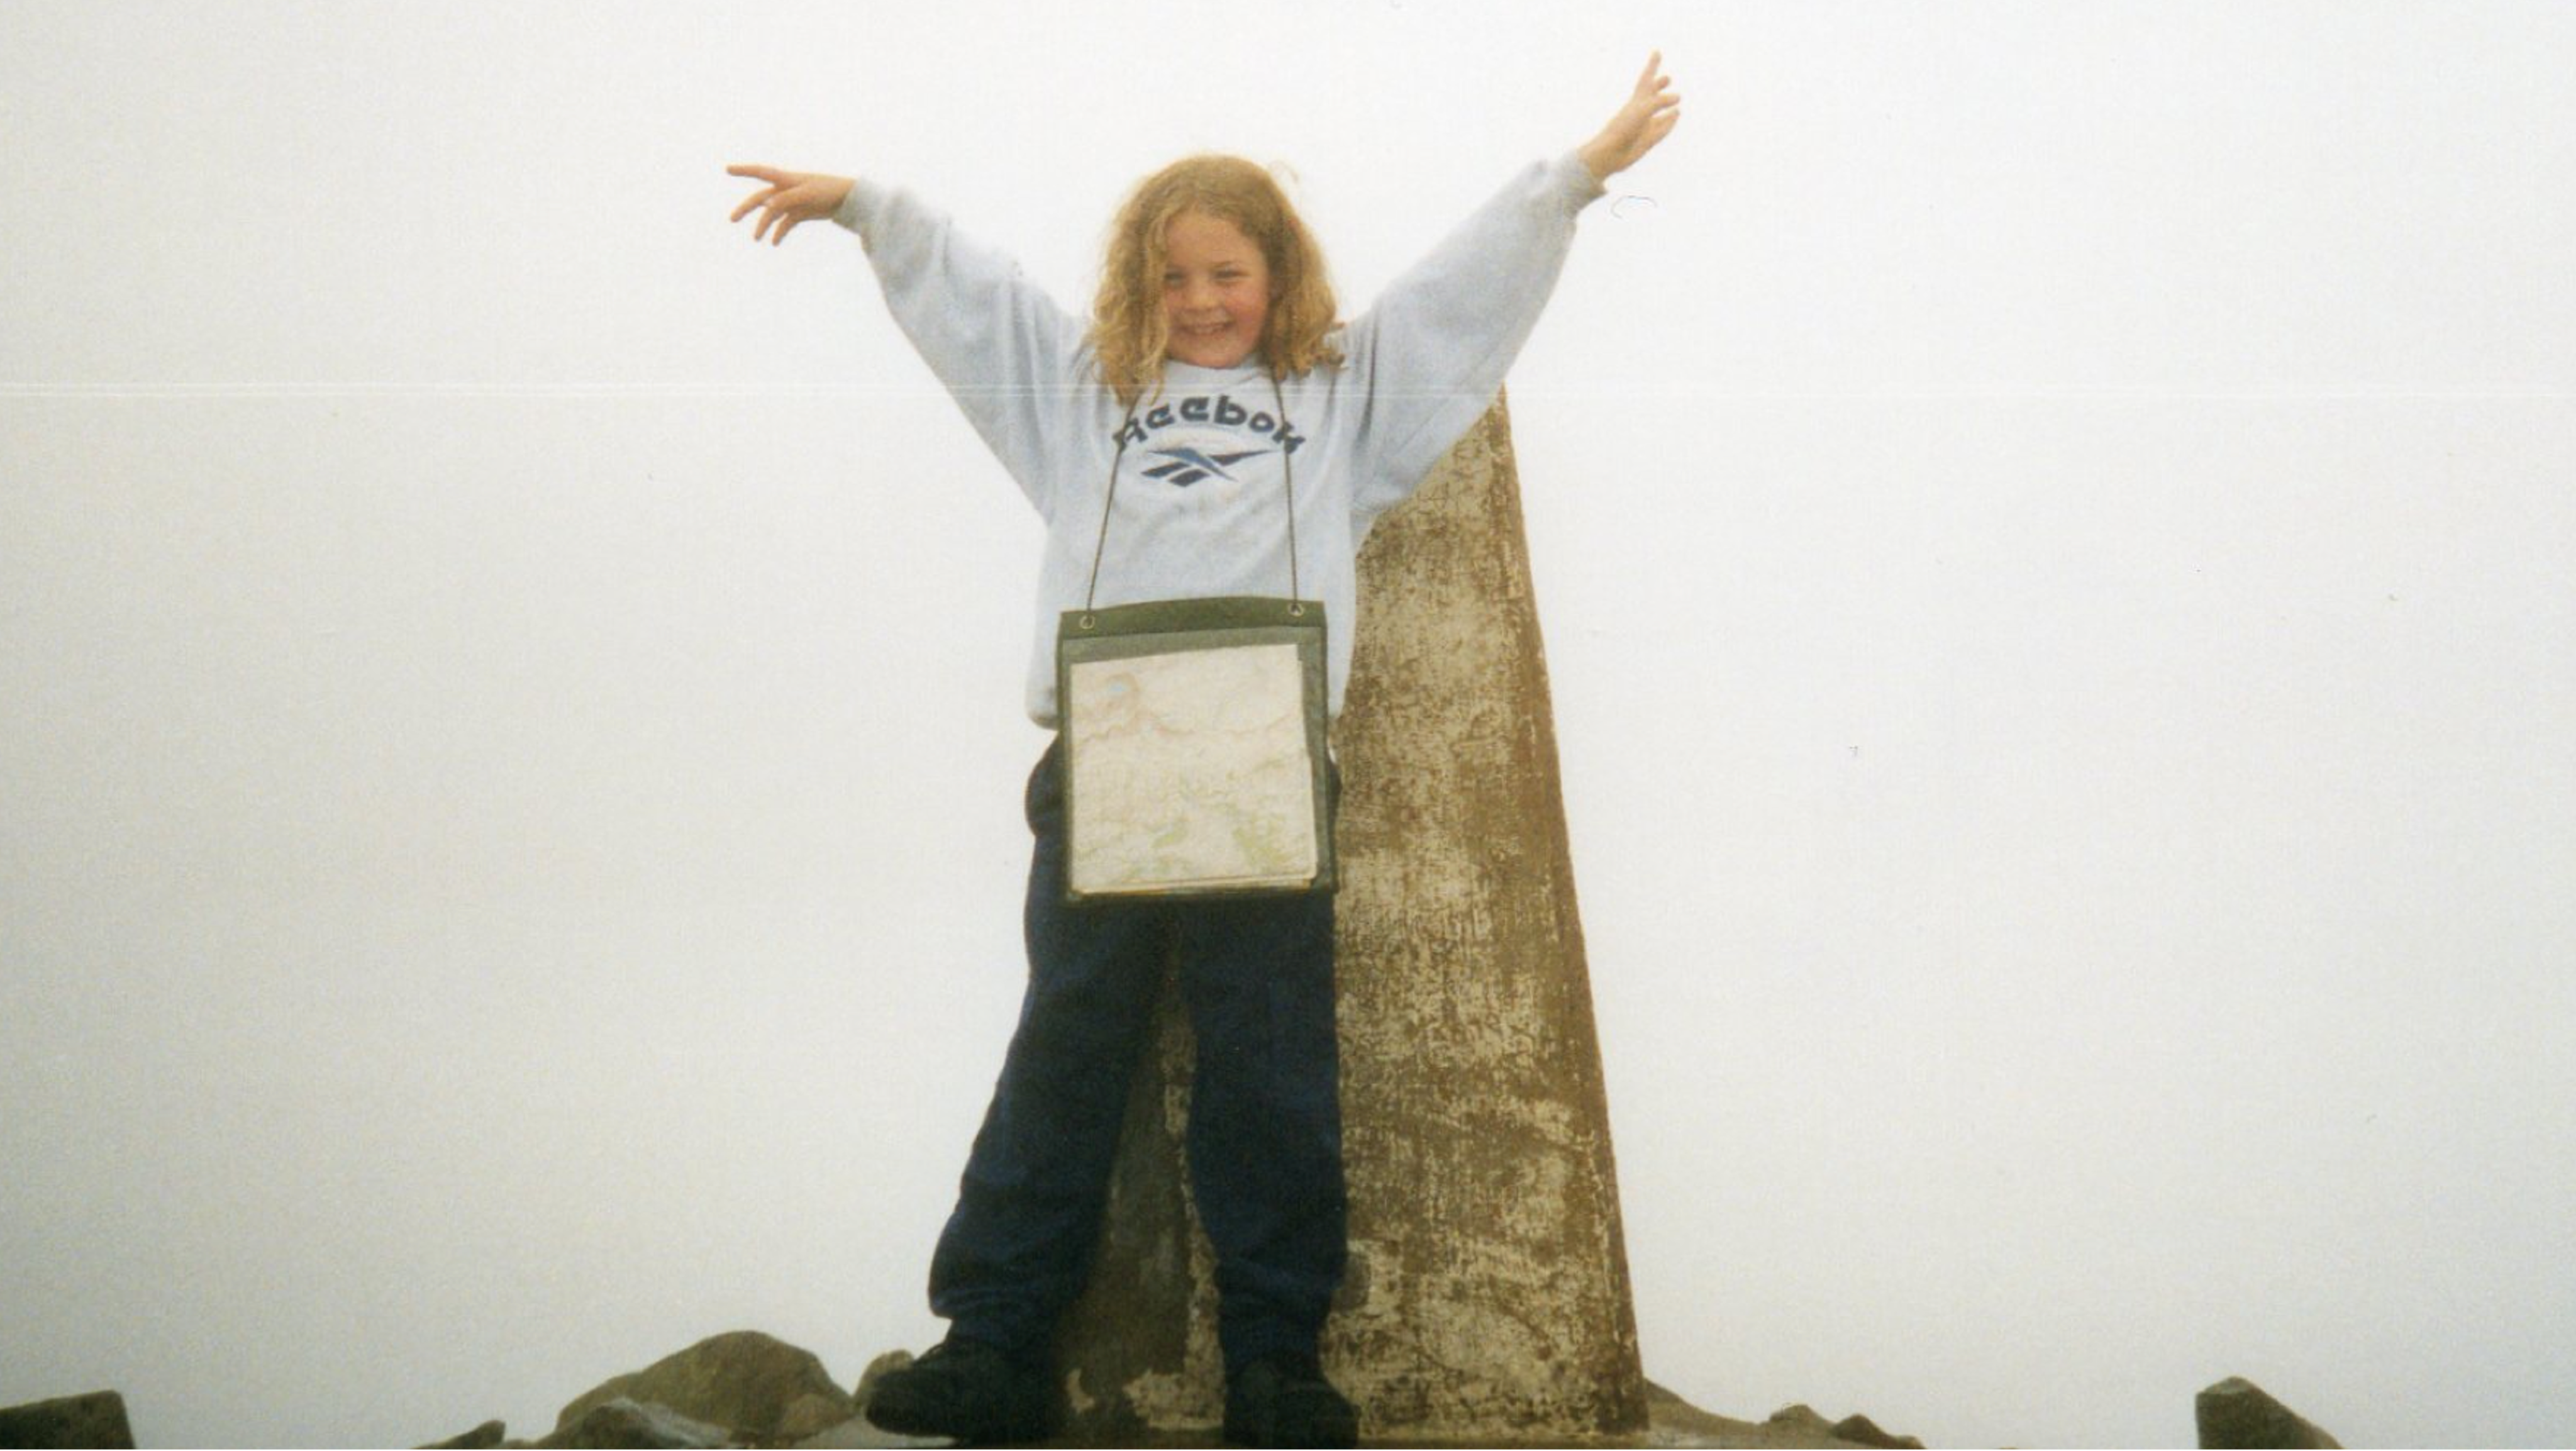 Elise age 6, wearing a grey Reebok sweatshirt, standing at the top of Cadair Idris in Wales with a map around her neck and hands in the air